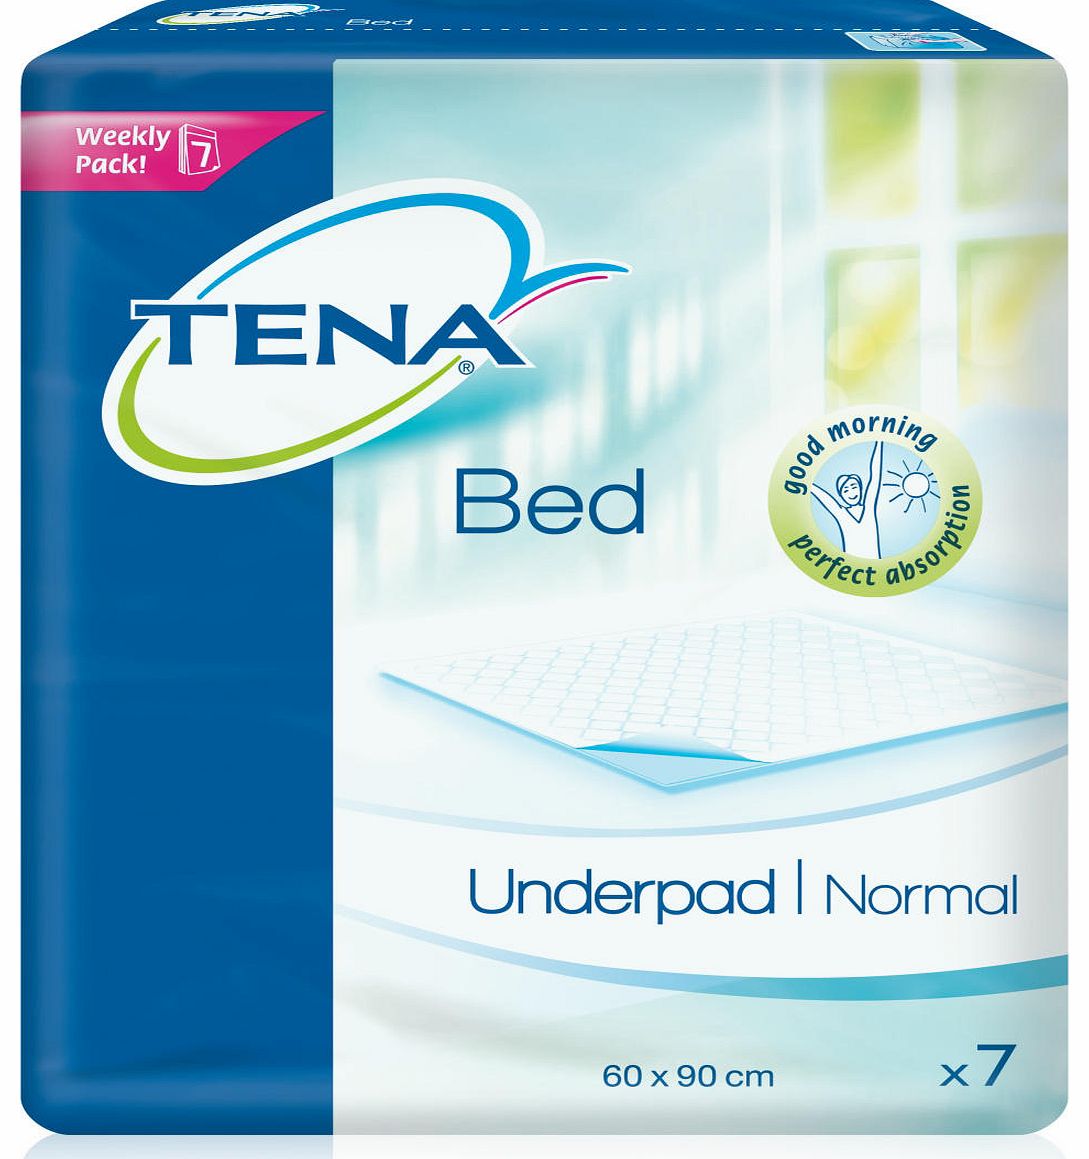 Bed Underpad Weekly Pack